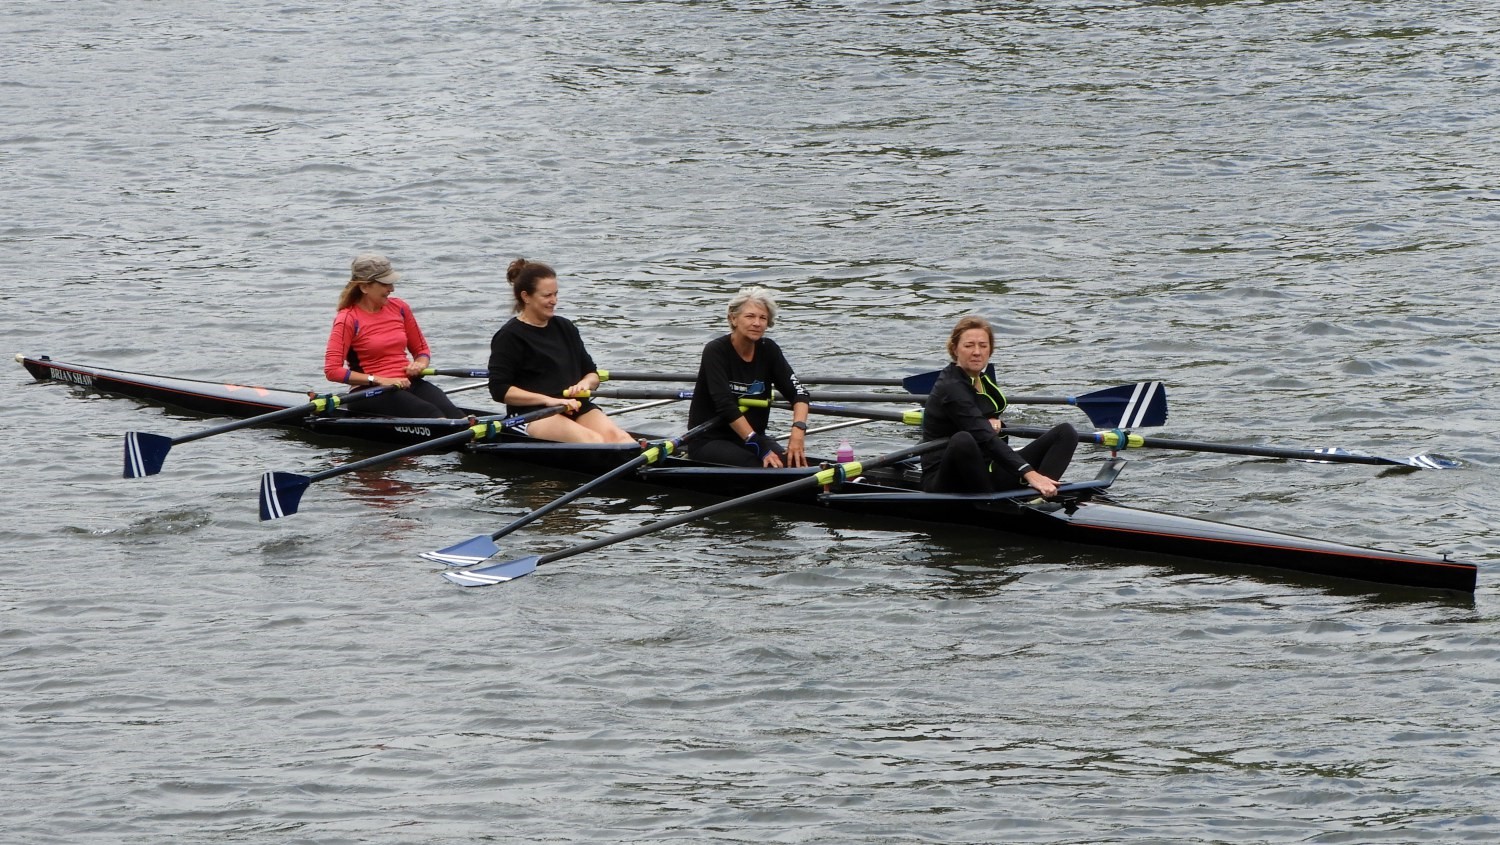 Coxless Four practicing on the Thames